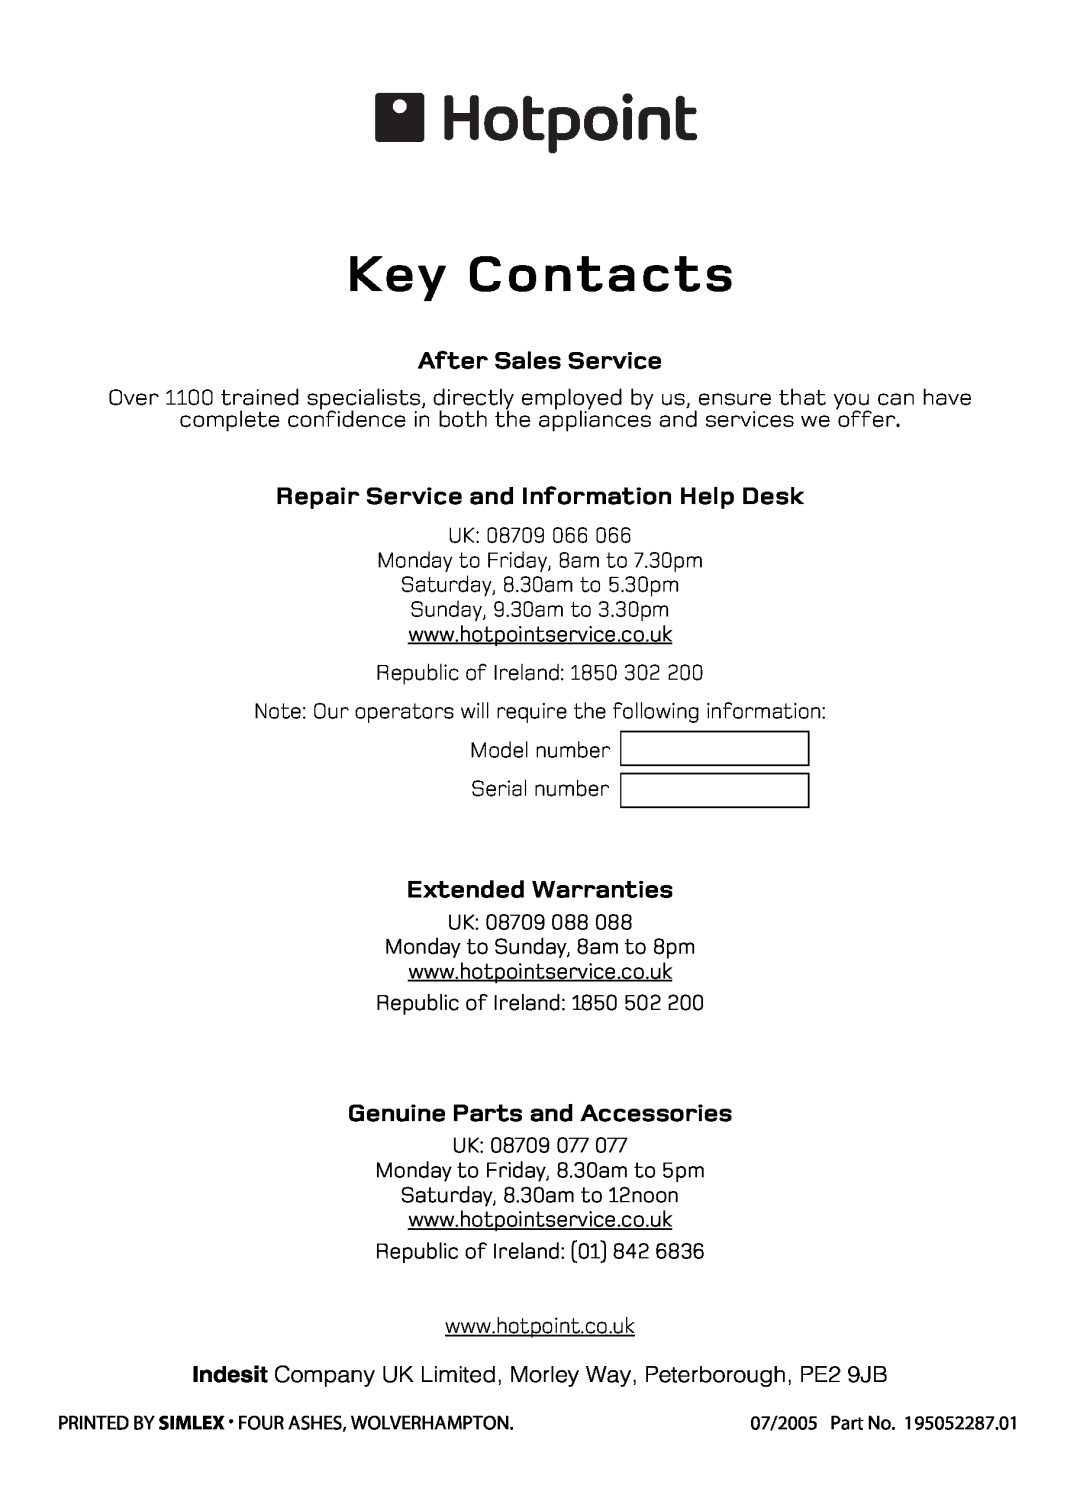 Hotpoint 5TCG manual Key Contacts, After Sales Service, Repair Service and Information Help Desk, Extended Warranties 